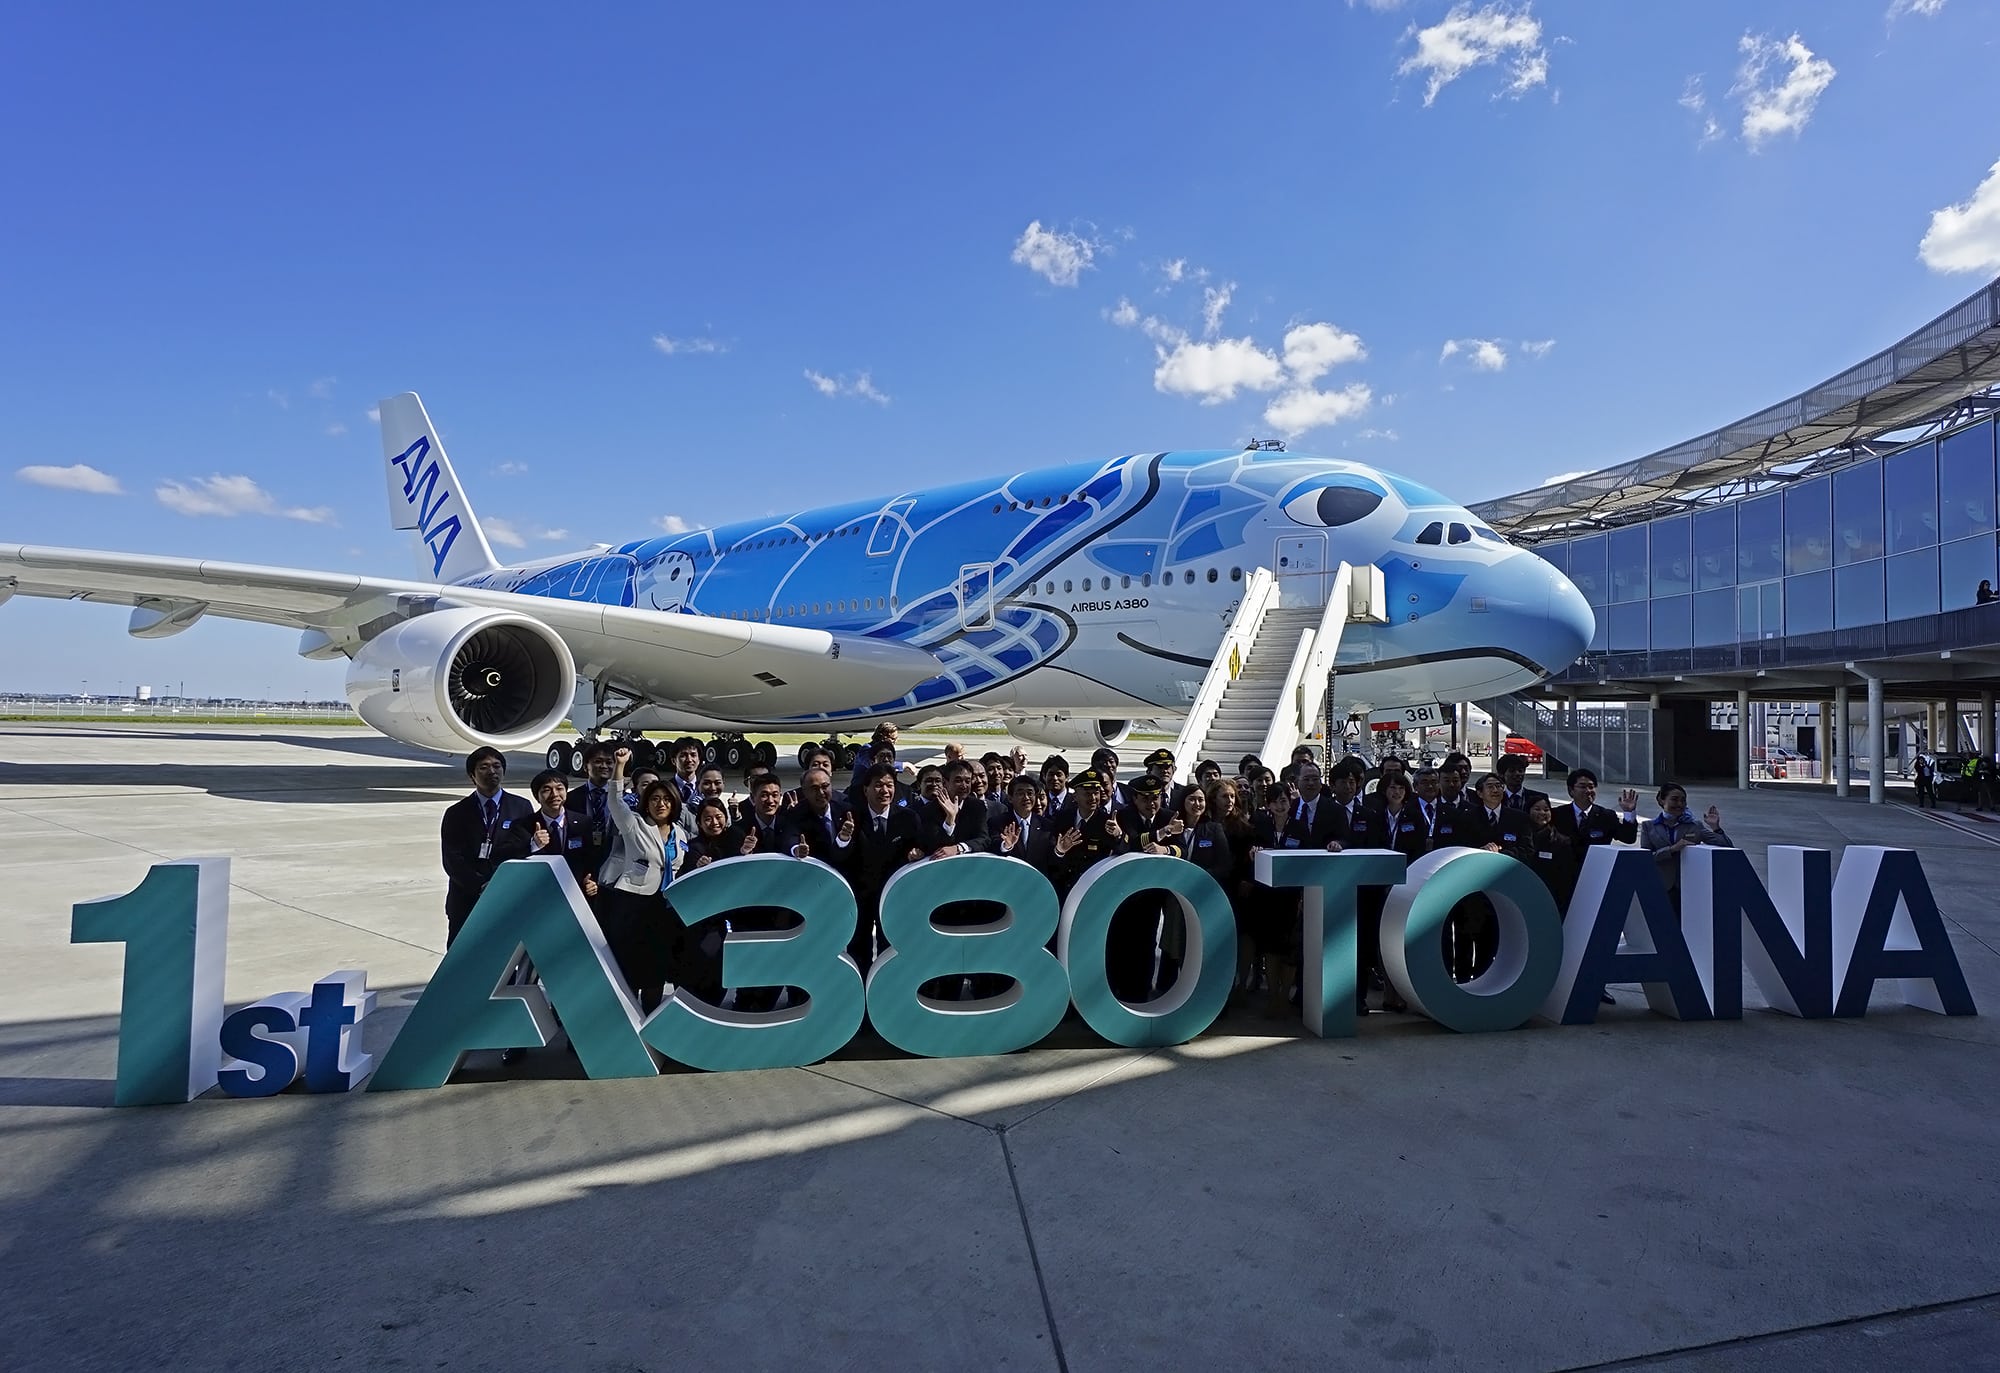 PHOTOS] ANA Takes Delivery of Its First Airbus A380 - APEX